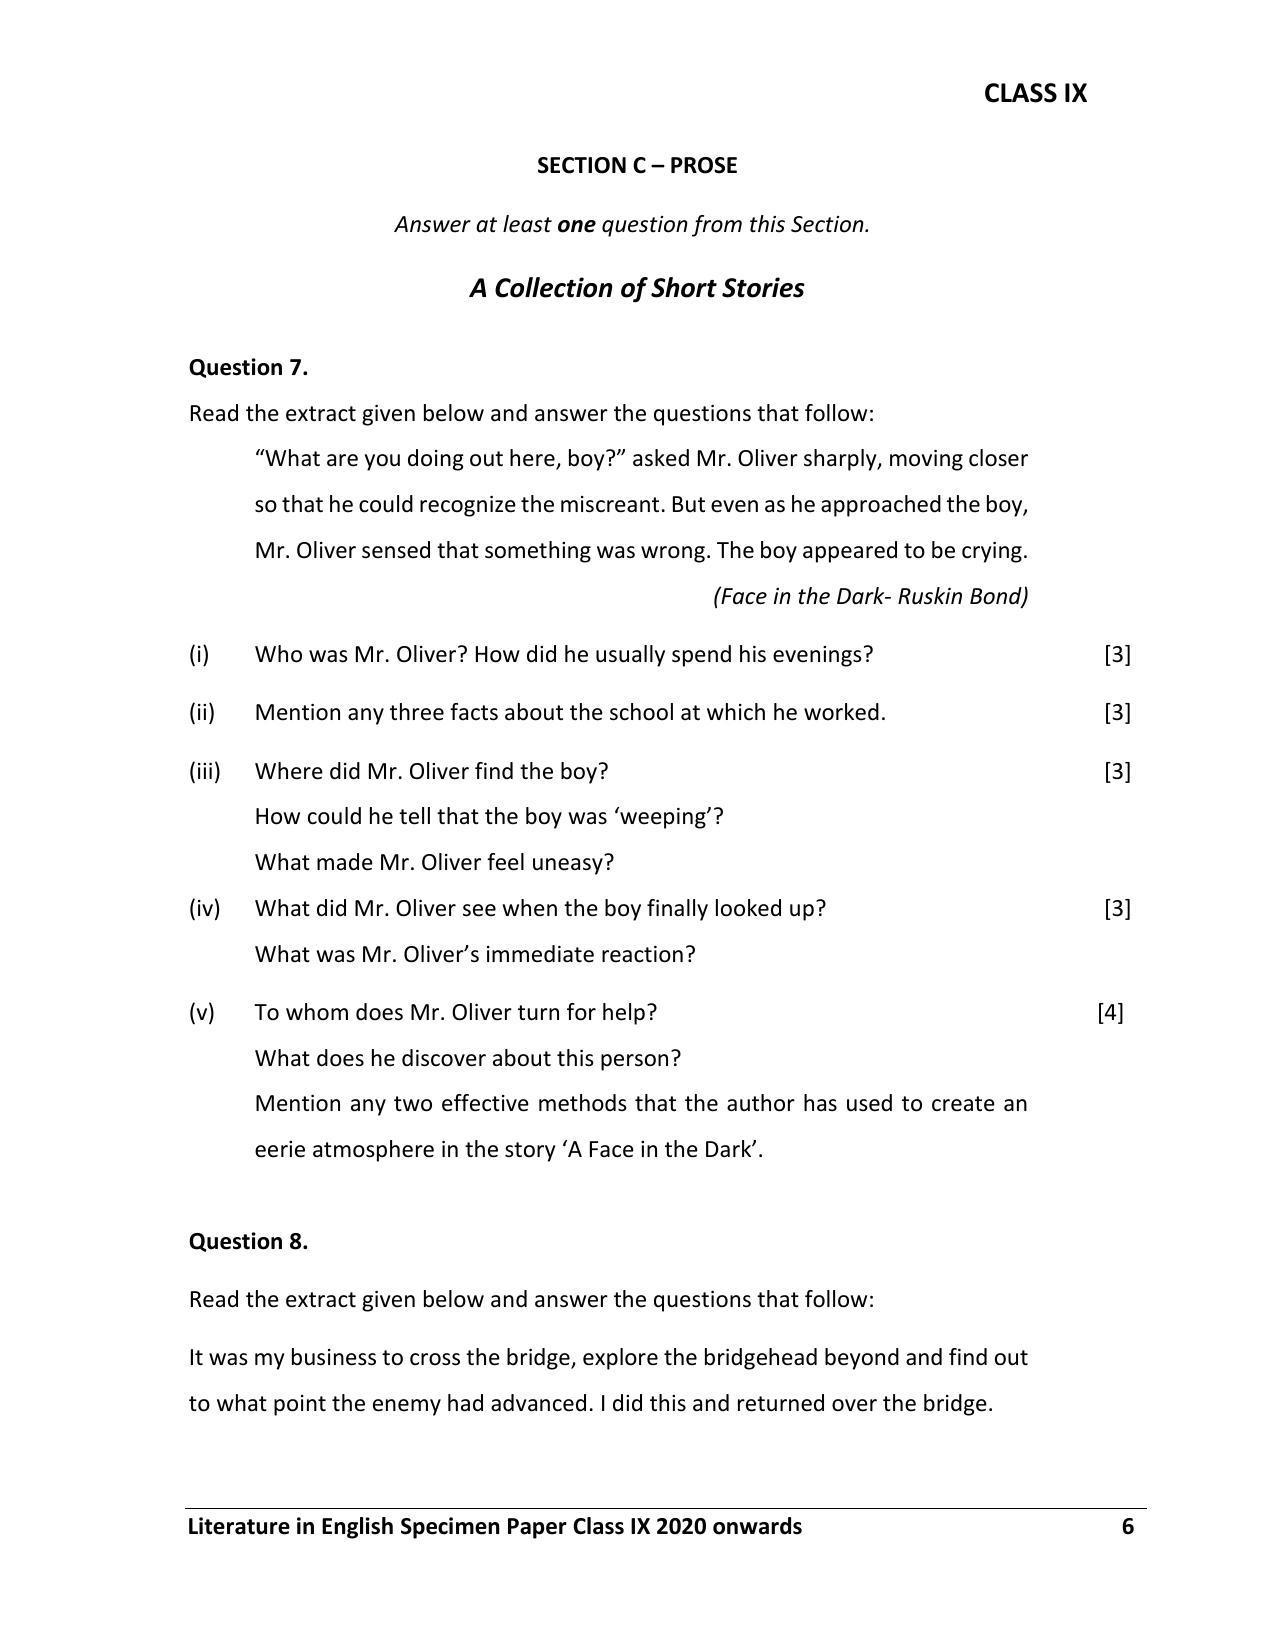  ICSE Class 9 English Paper 2 (LITERATURE IN ENGLISH) Sample Paper - Page 6